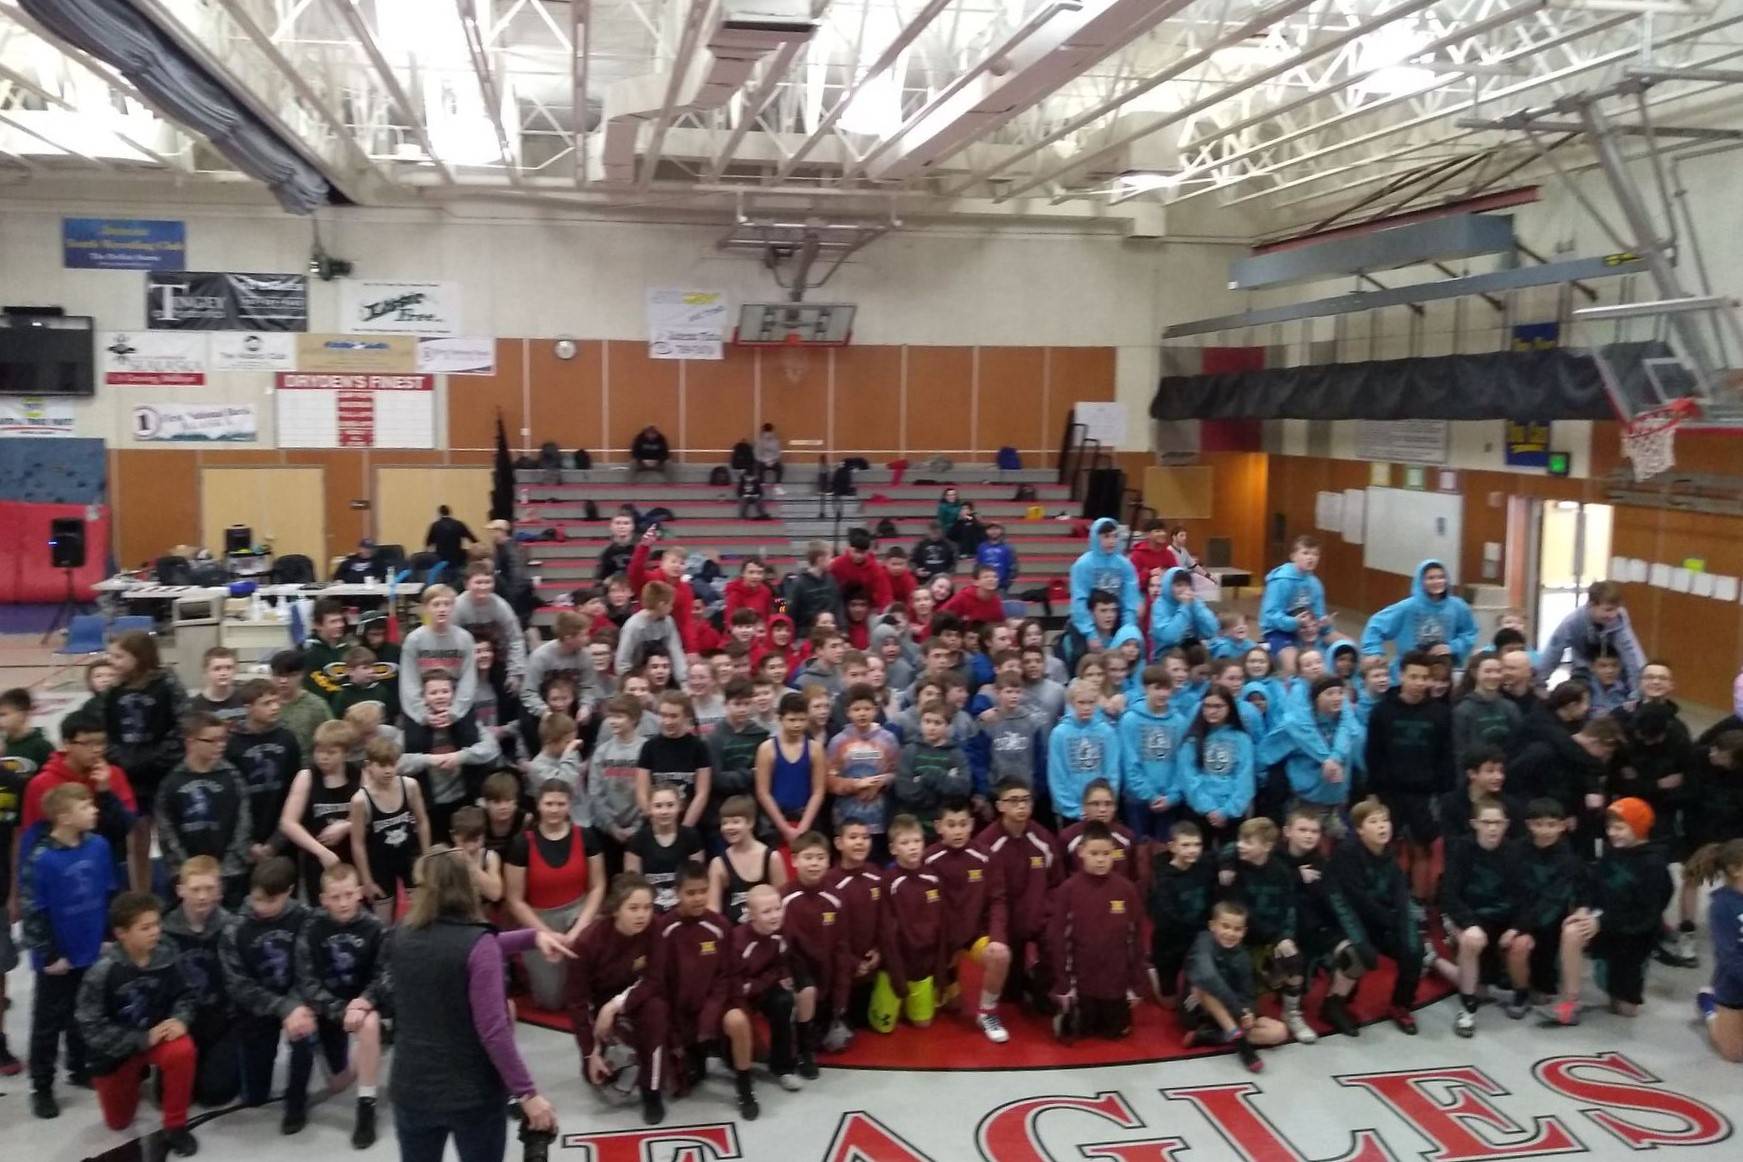 Wrestlers from across Southeast Alaska in the gym at Floyd Dryden Middle School for the Southeast Alaska Middle School Wrestling Tournament on Saturday, Feb. 15, 2020. (Courtesy photo | Ken Brown)